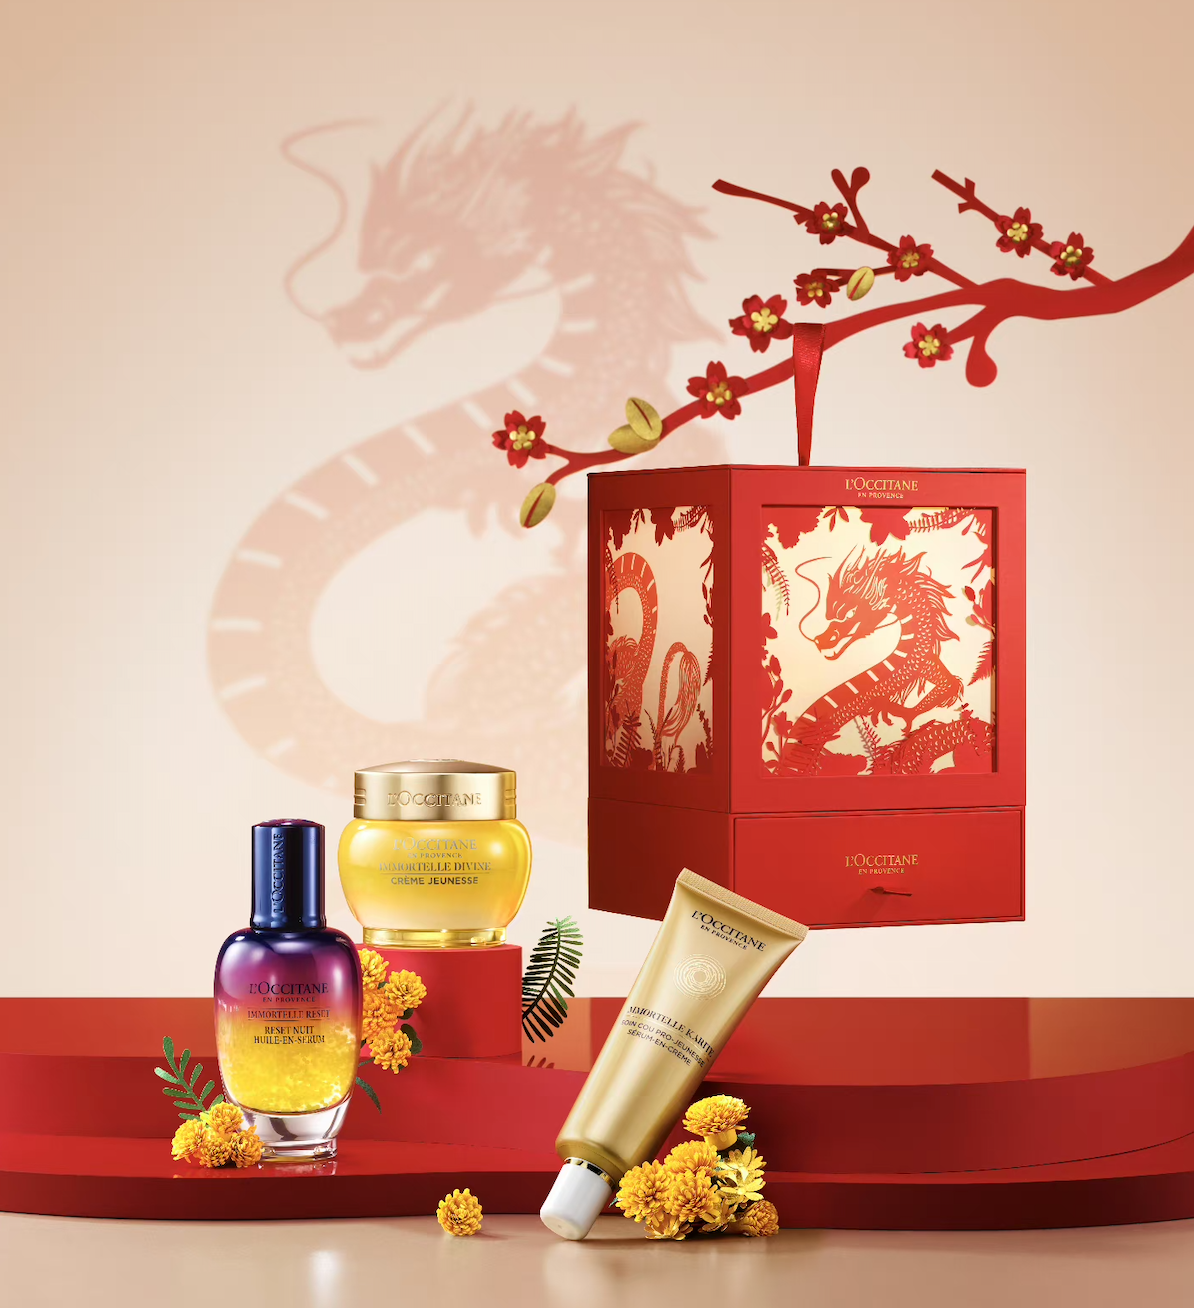 French beauty label L’Occitane has crafted a gift box that doubles as a dragon-patterned paper-cut lantern, which can be lit and hung in the homes of holiday shoppers. Image: L'Occitane